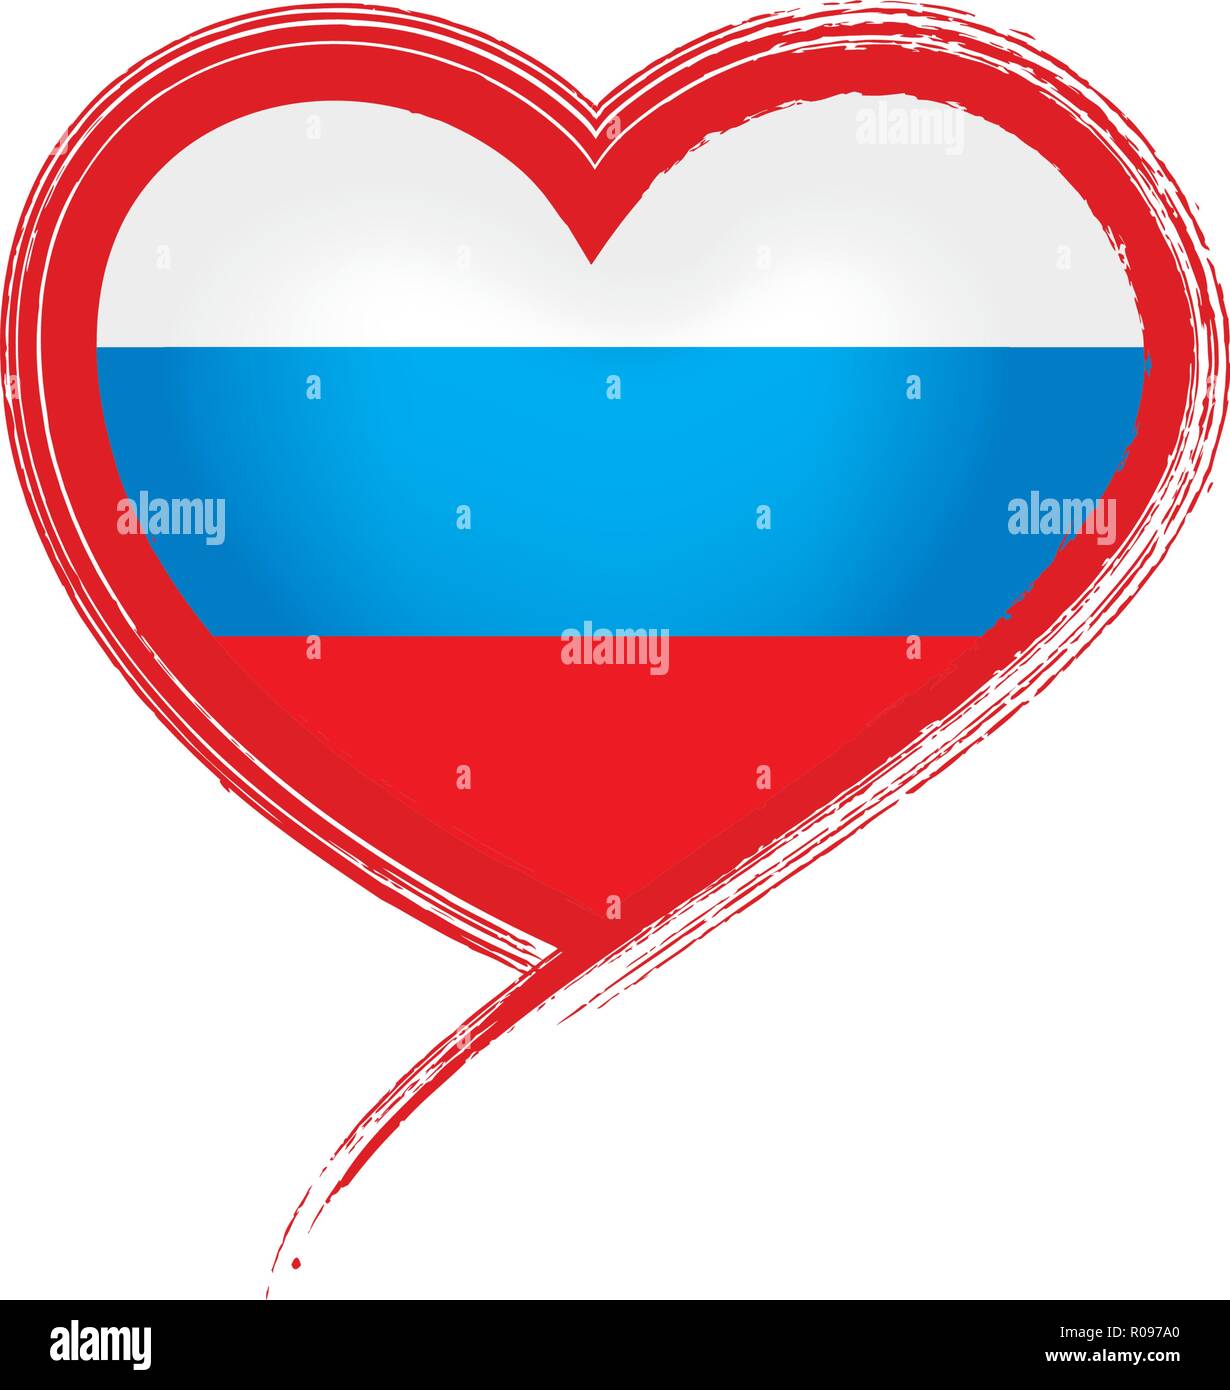 Russian flag in heart shape on white background stock photo